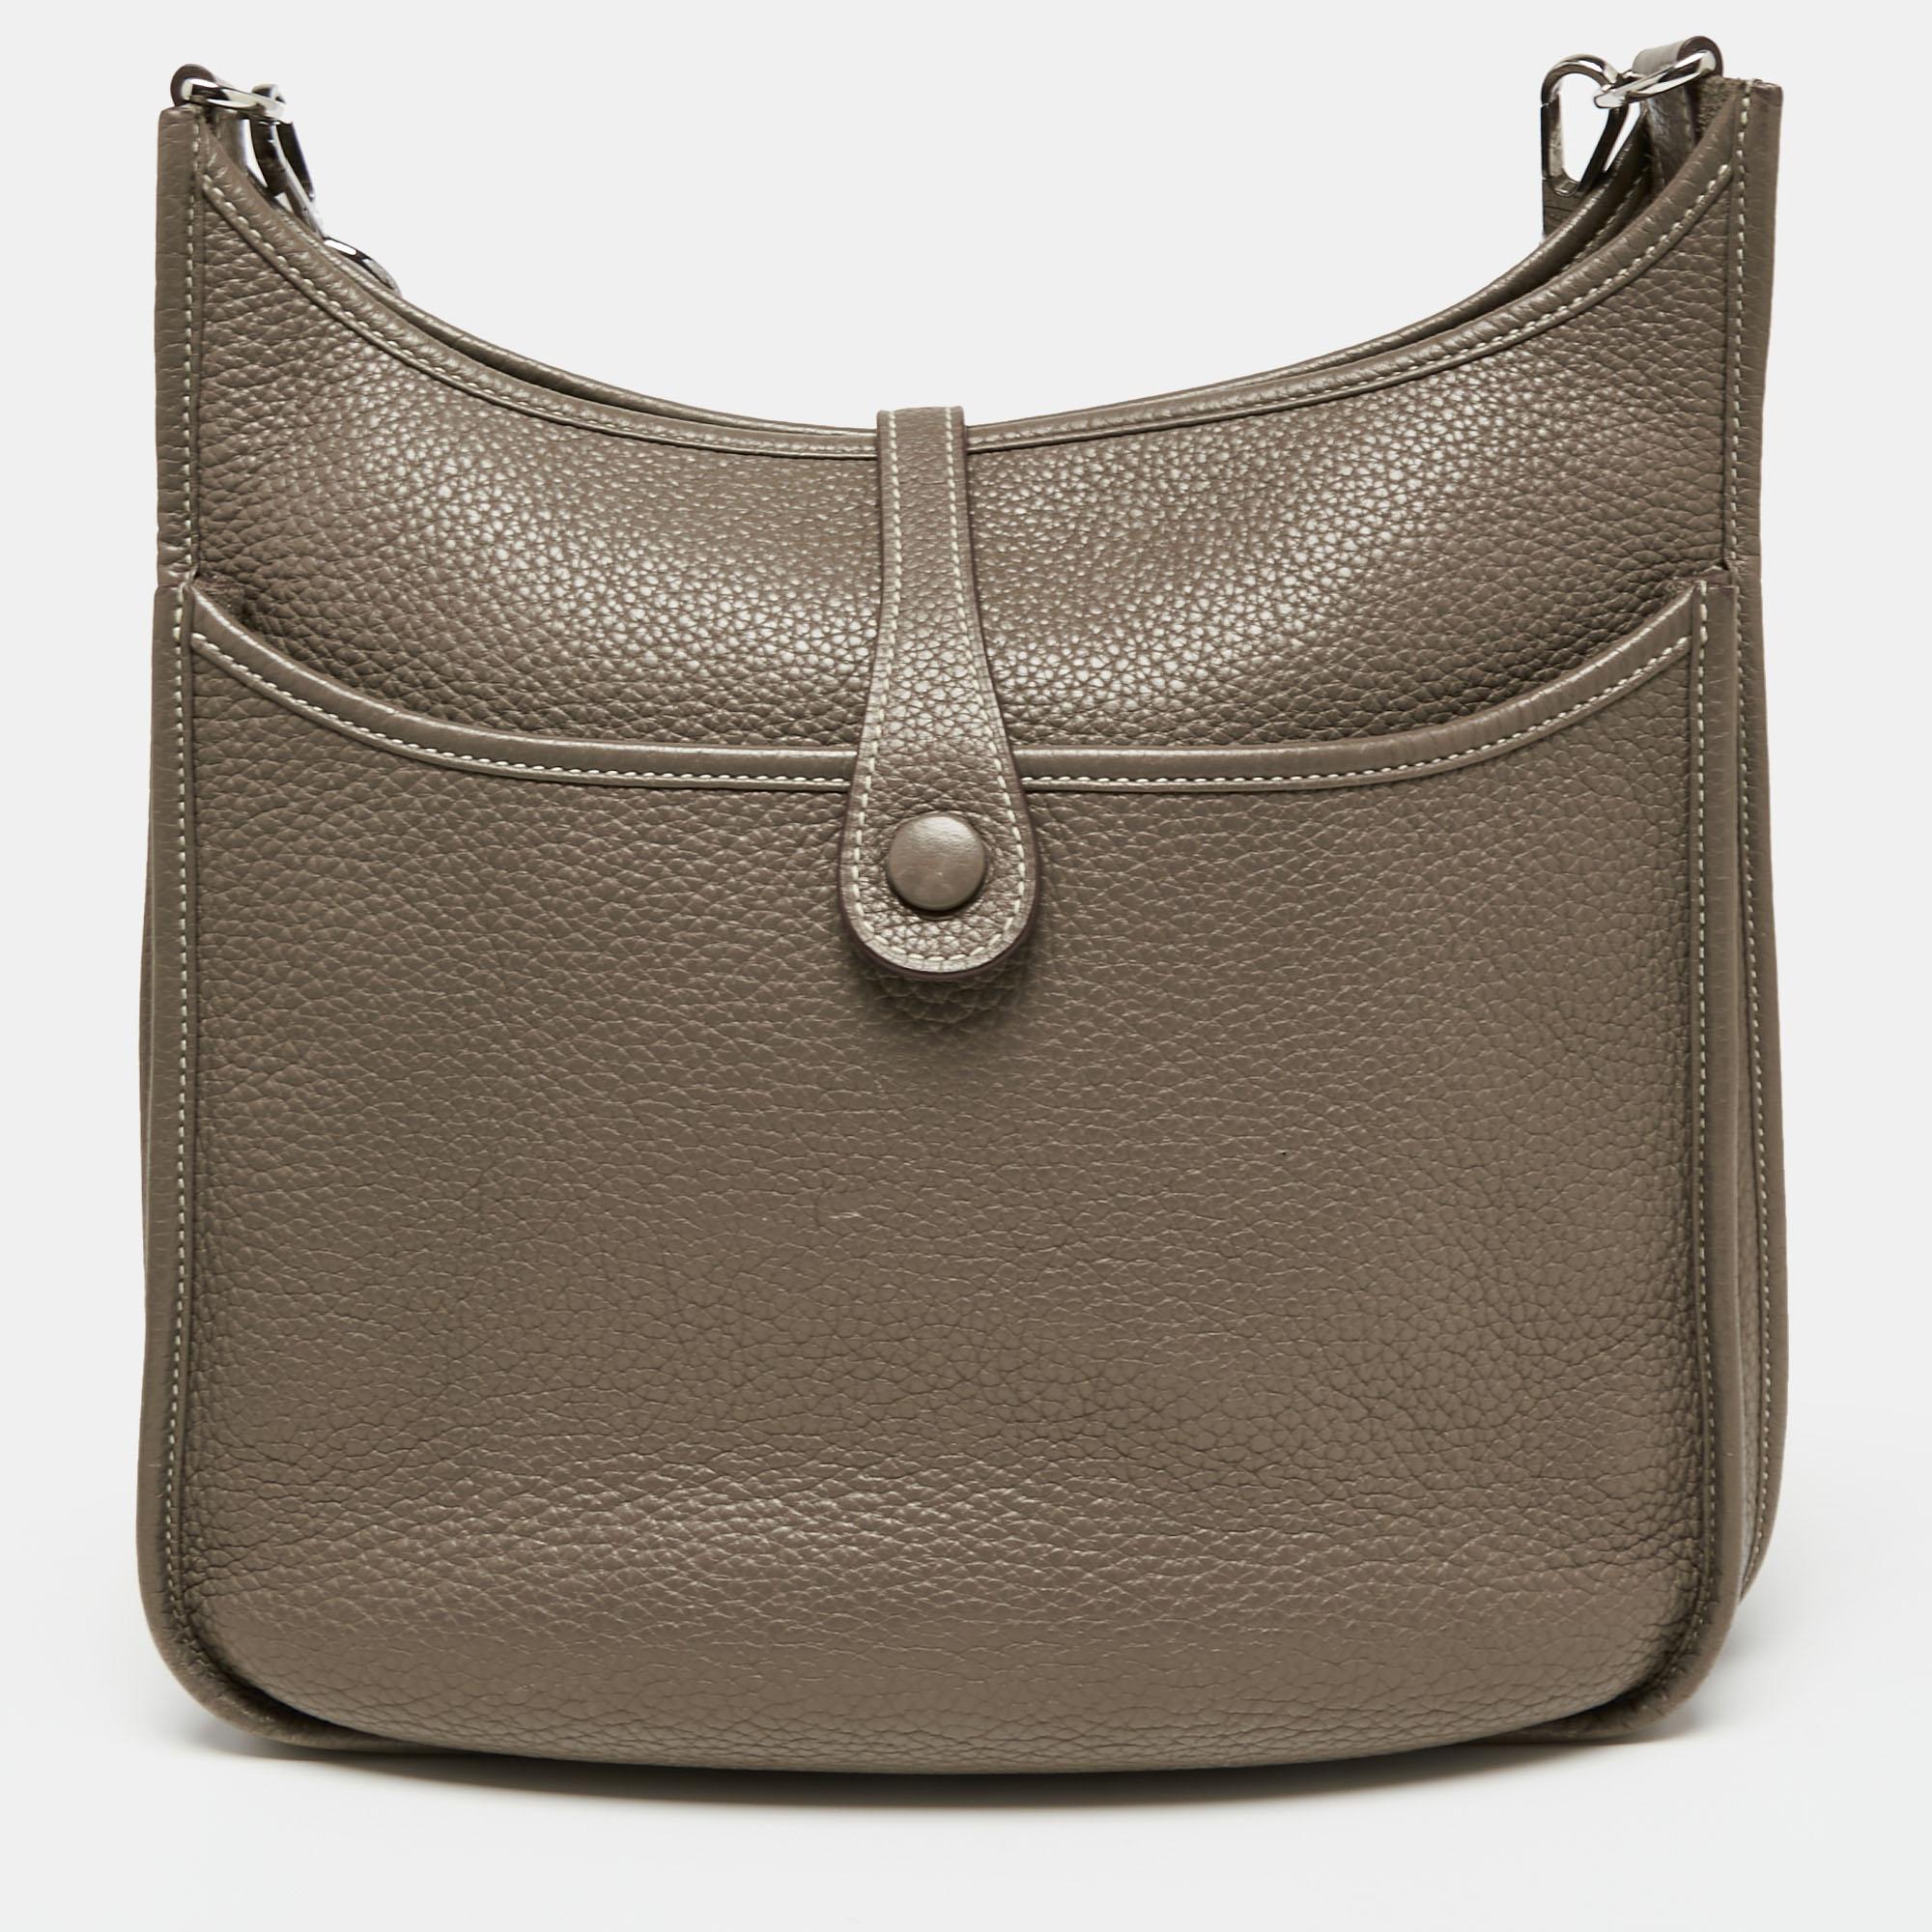 The Evelyne III is another investment-worthy bag from Hermès. This one here in the PM size is crafted from Togo leather and detailed with the signature elements of the leather tab closure, the saddle-like shape, and the perforated H on the front.